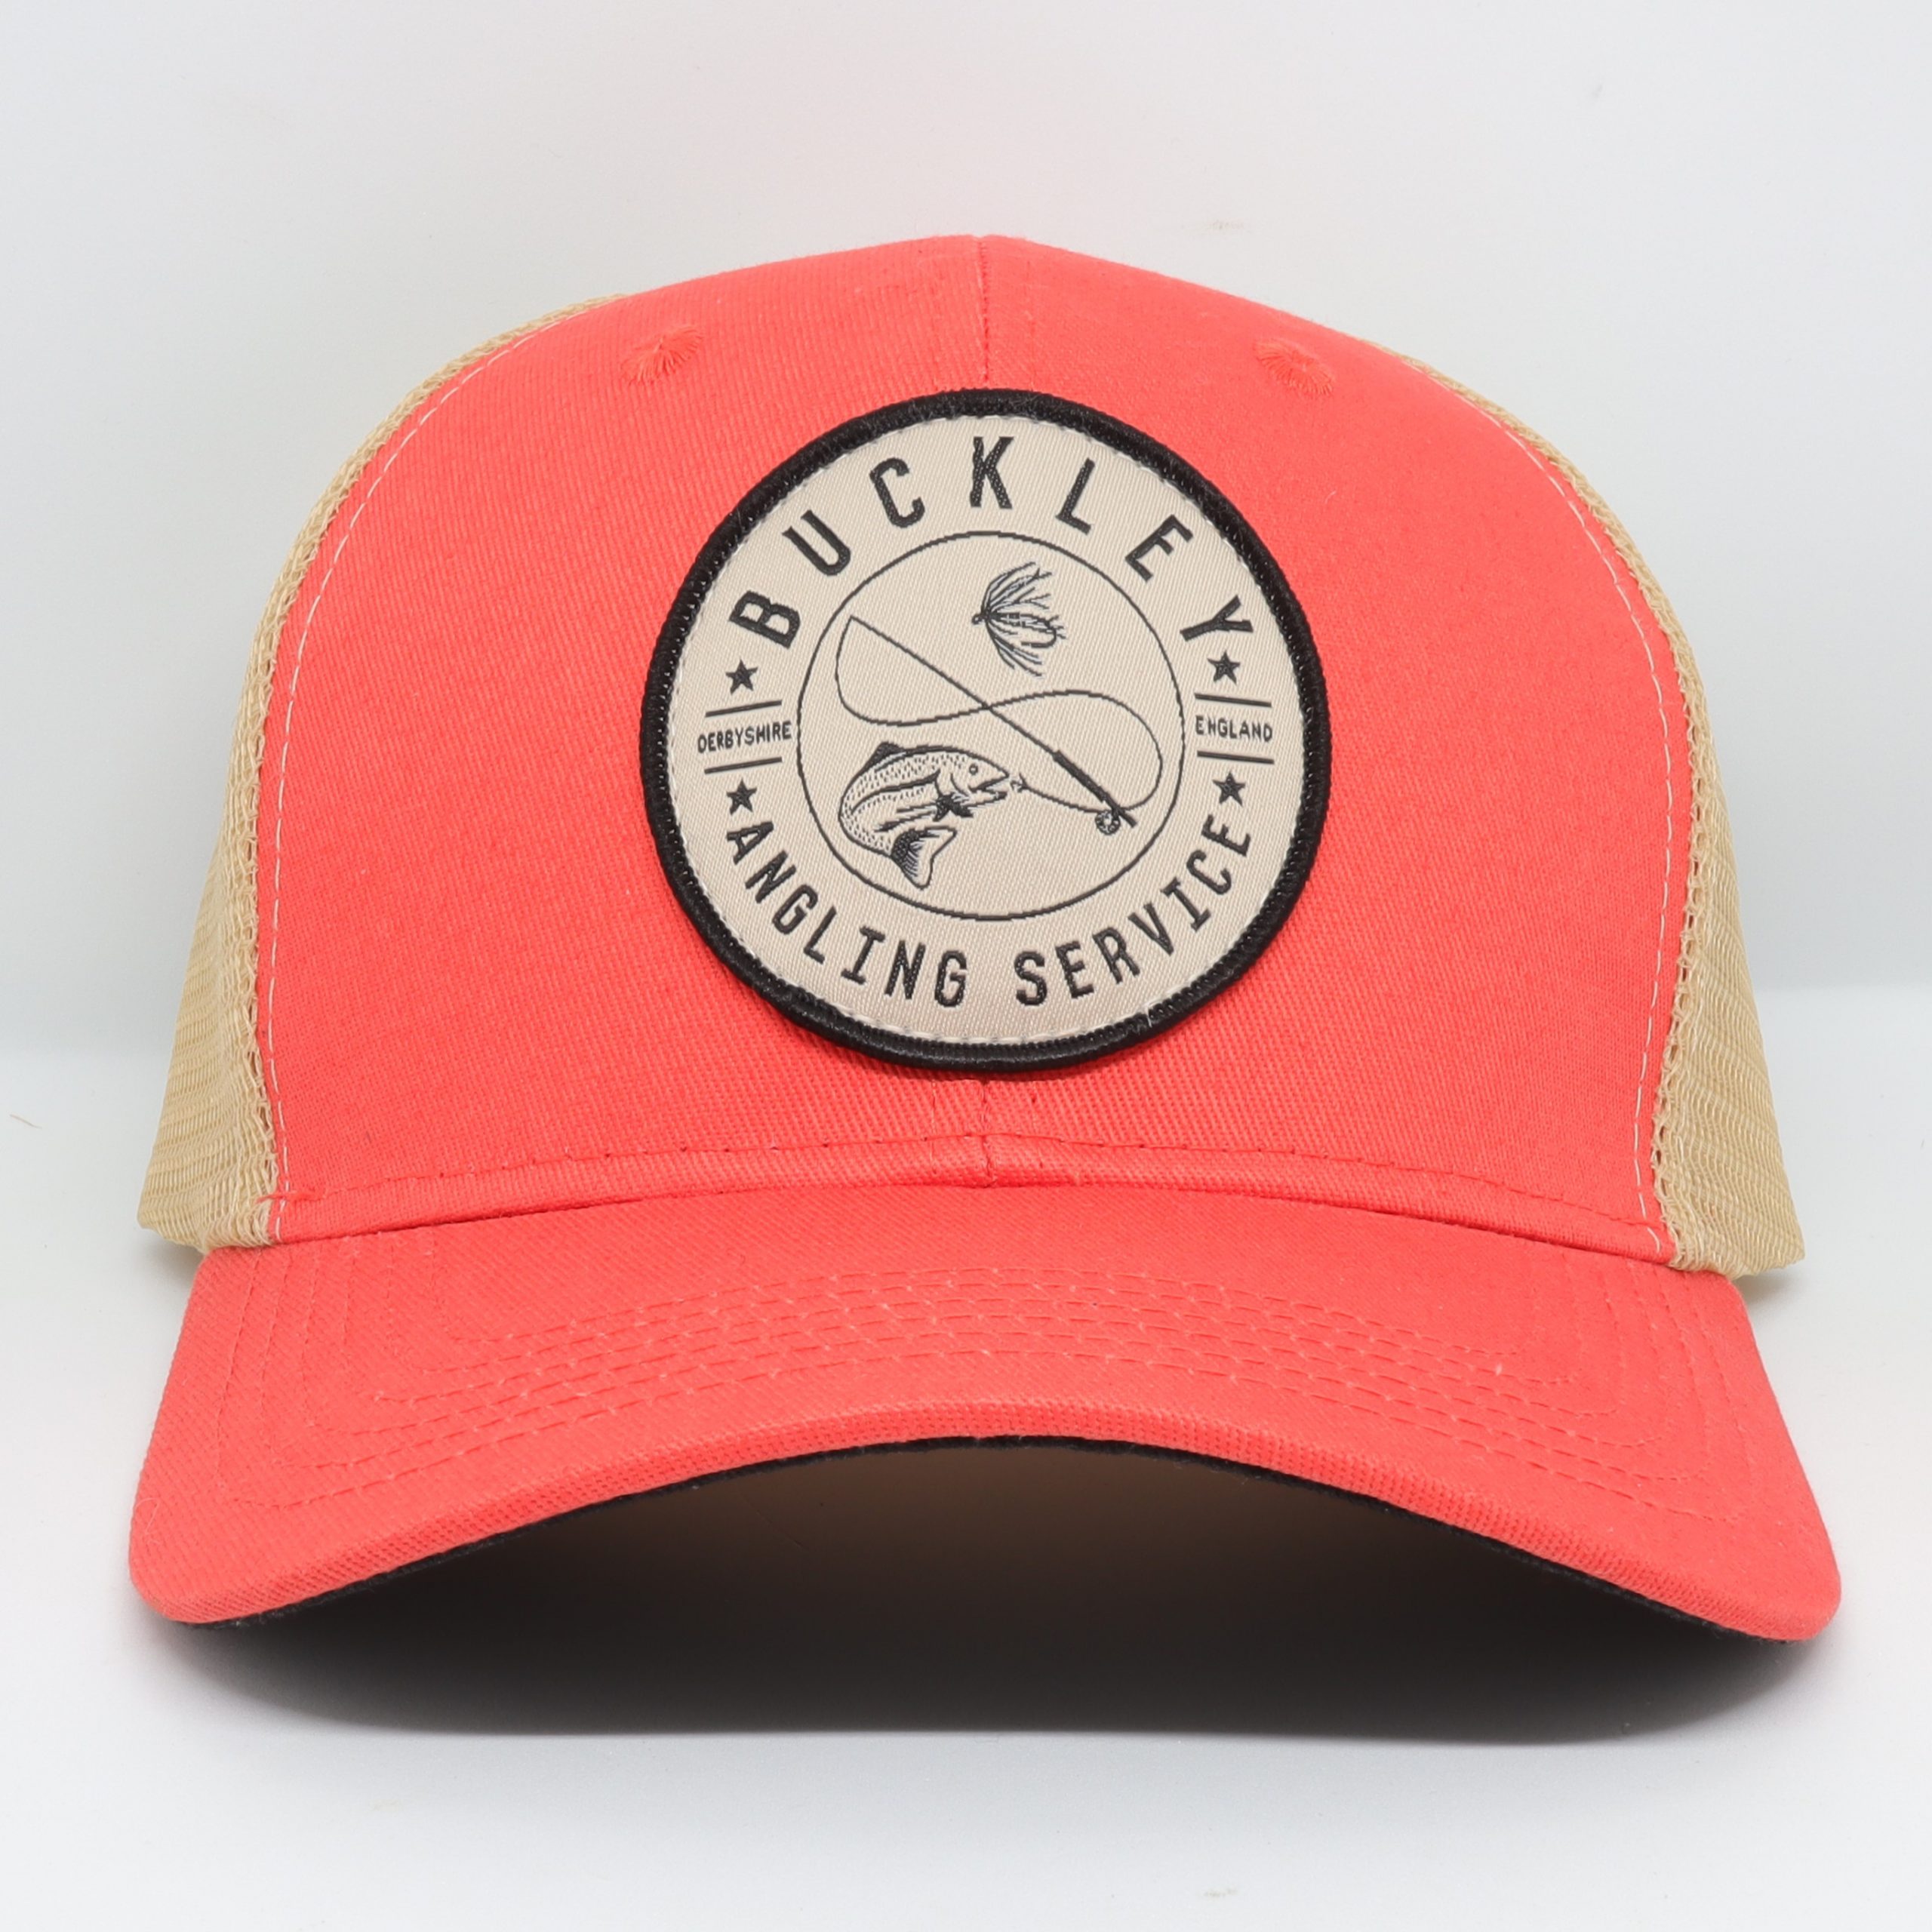 O.G. Orange ABAS Trucker Cap - Post Free! - Derbyshire Fishing Guide - Andy  Buckley Angling Service